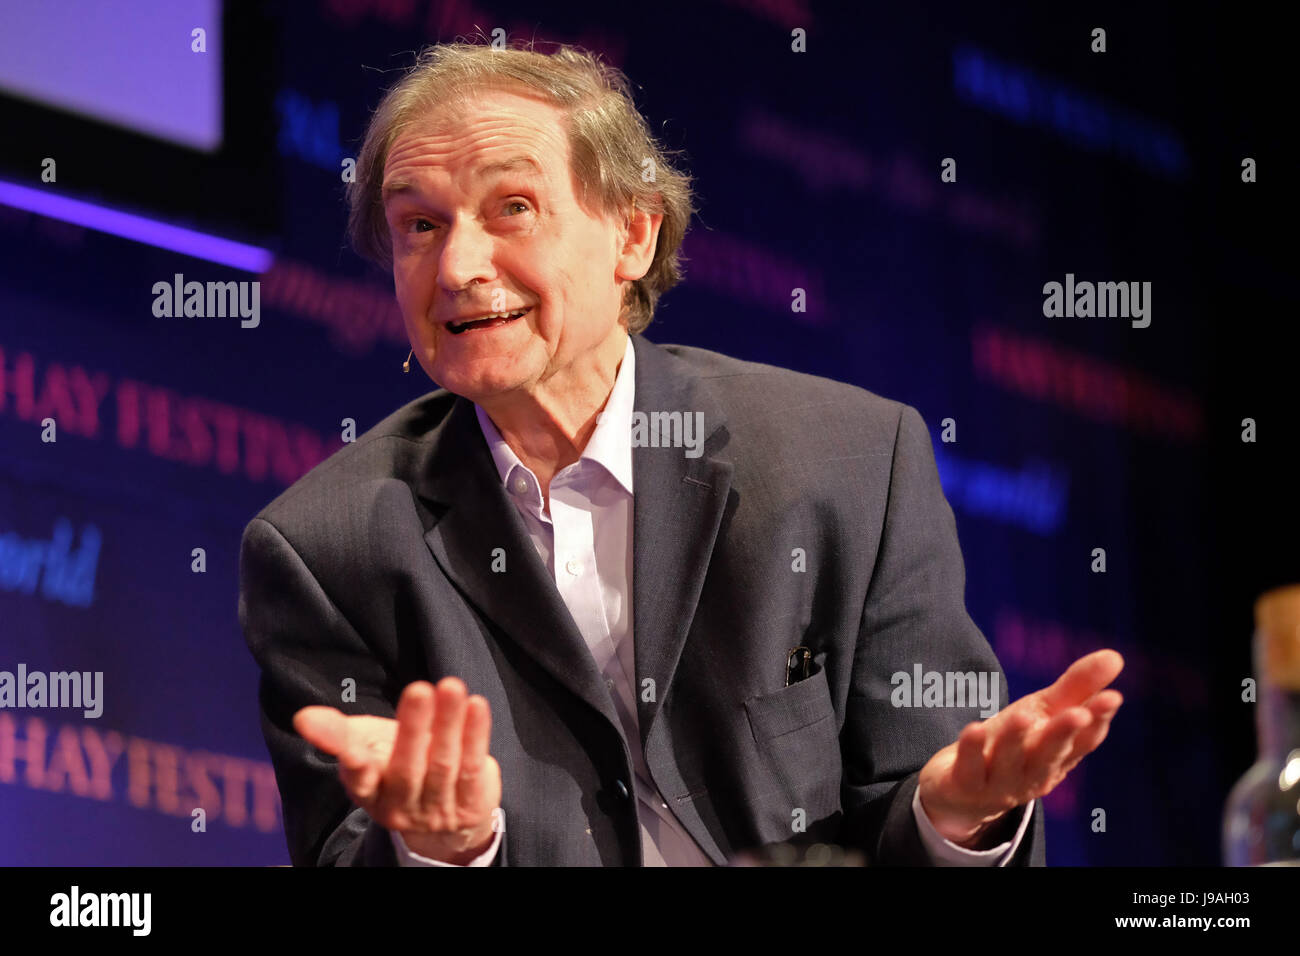 Hay Festival 2017 - Hay on Wye, Wales, UK - June 2017 - Roger Penrose one of the world's foremost theoretical physicists on stage at the Hay Festival talking about his new book Fashion, Faith and Fantasy in the New Physics of the Universe -   Steven May / Alamy Live News Stock Photo